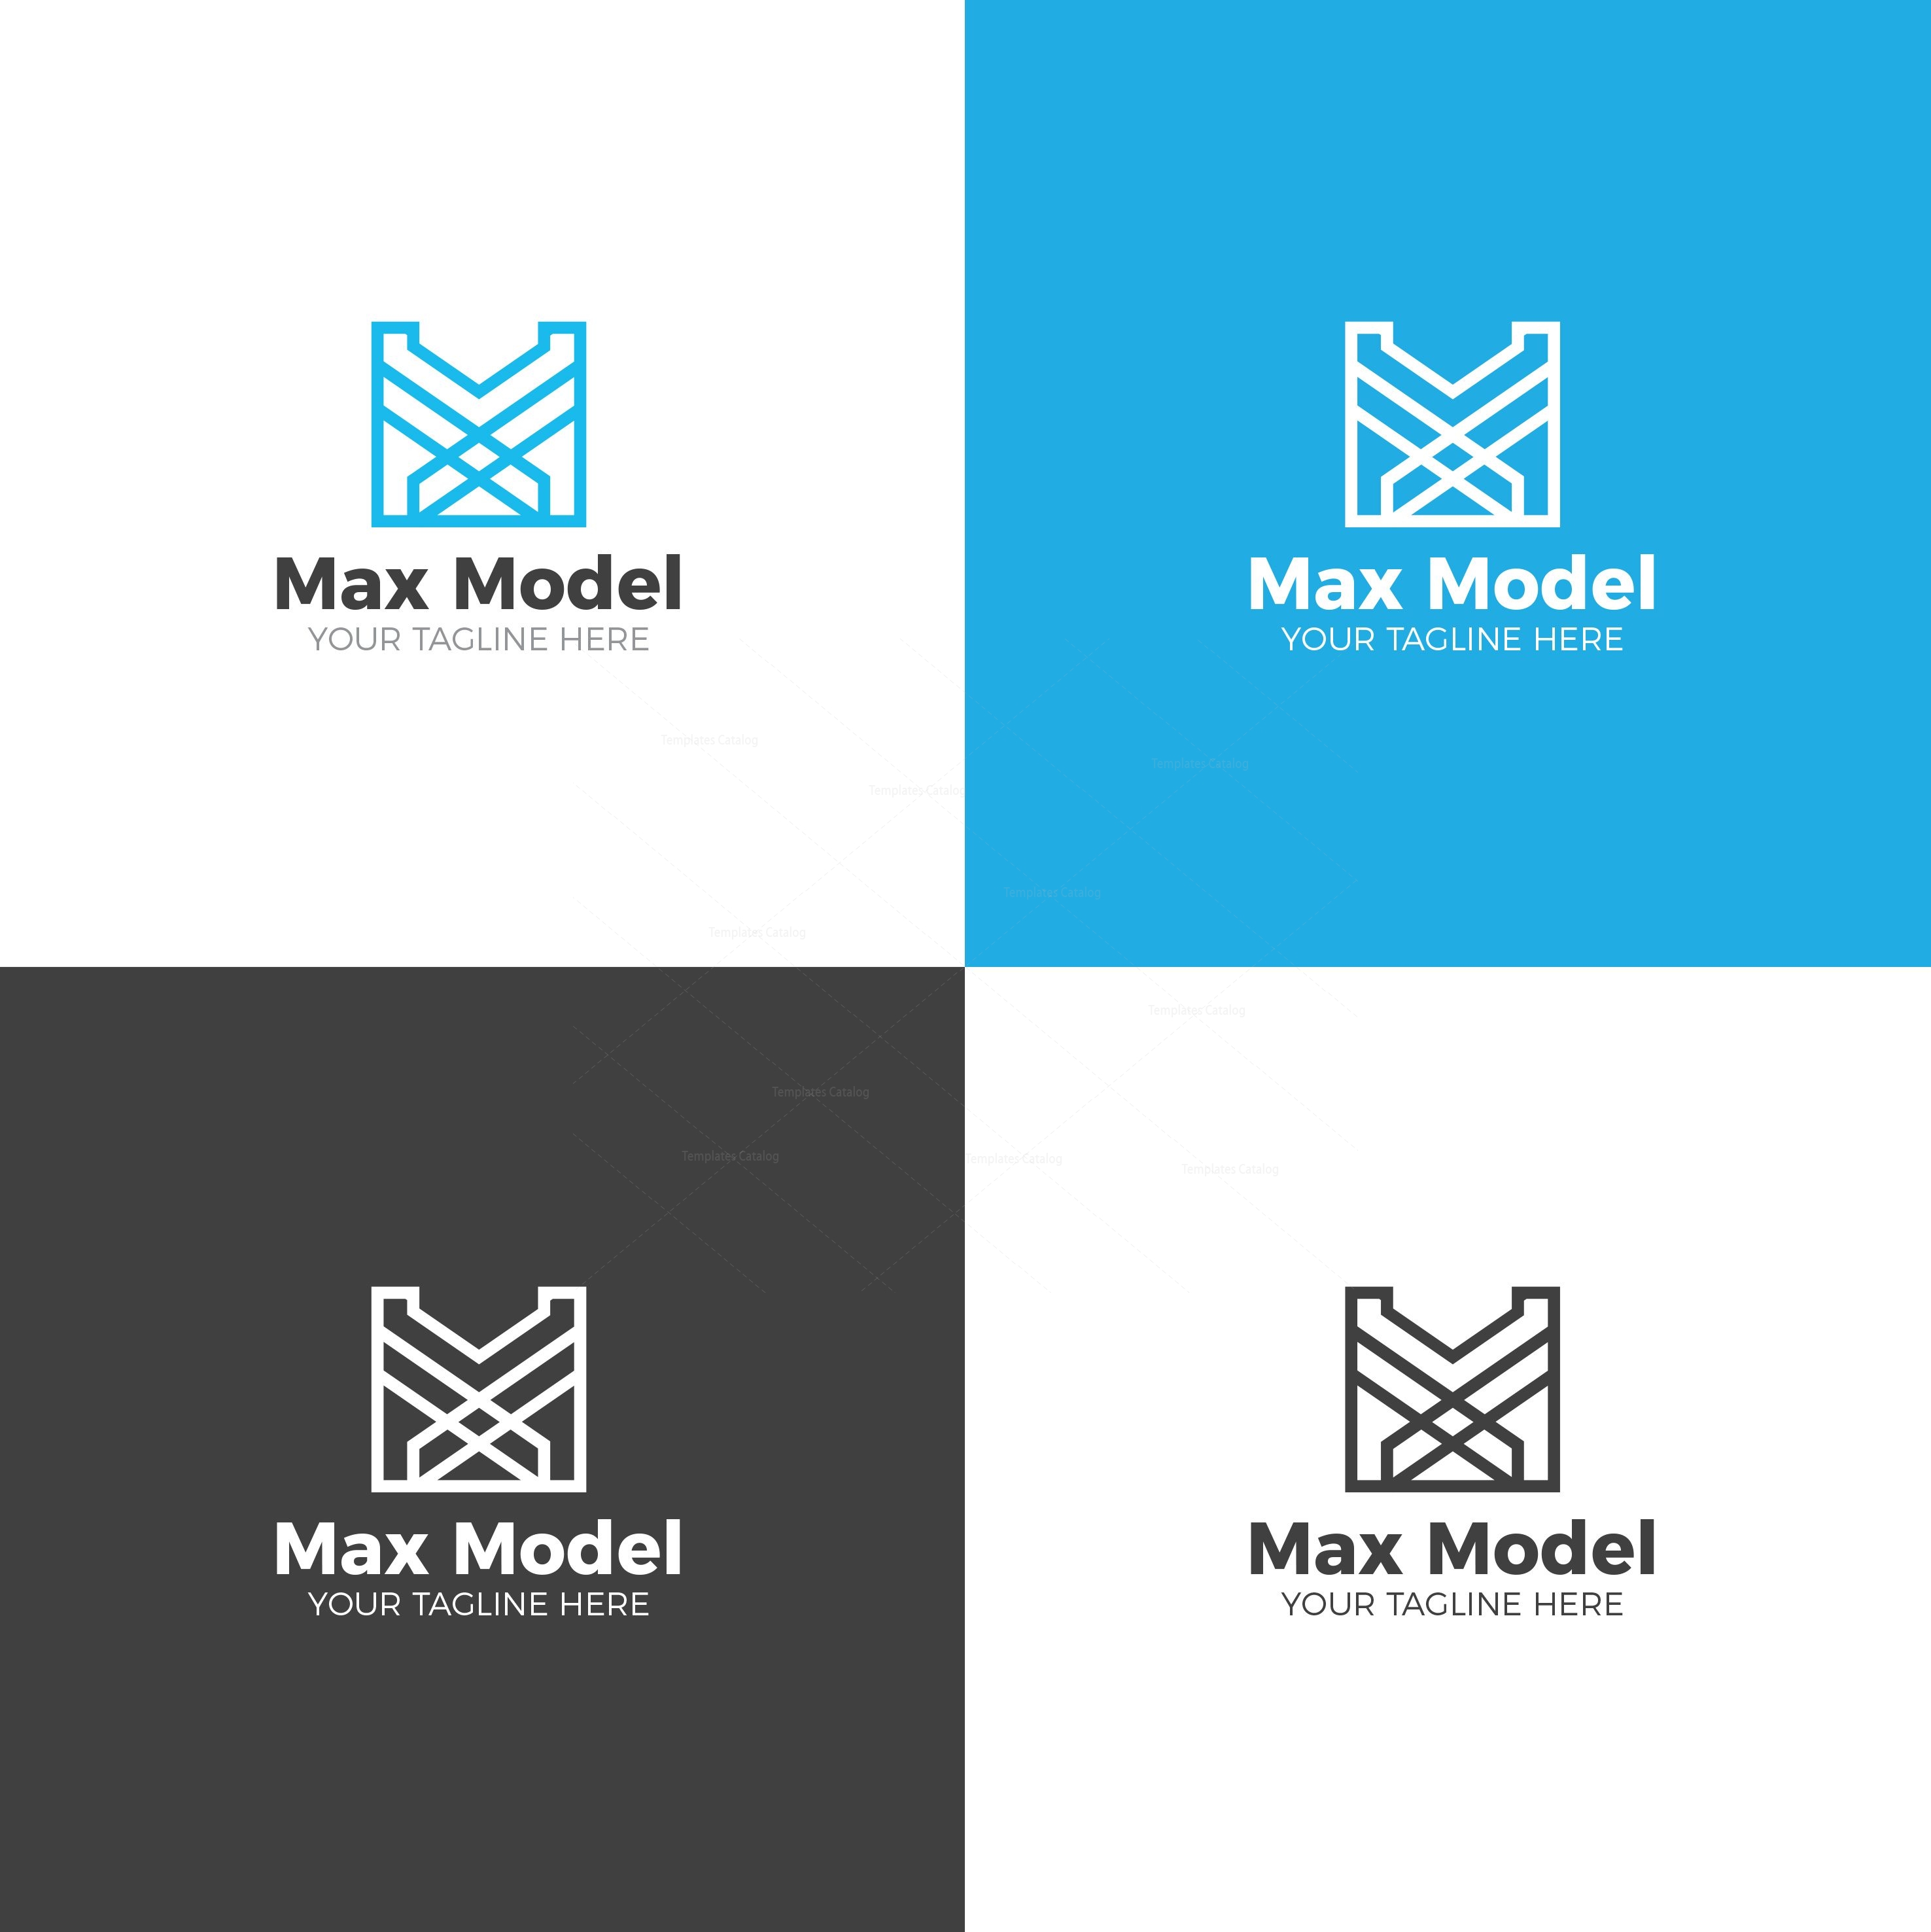 The Max Logo by Andy Sharpe on Dribbble